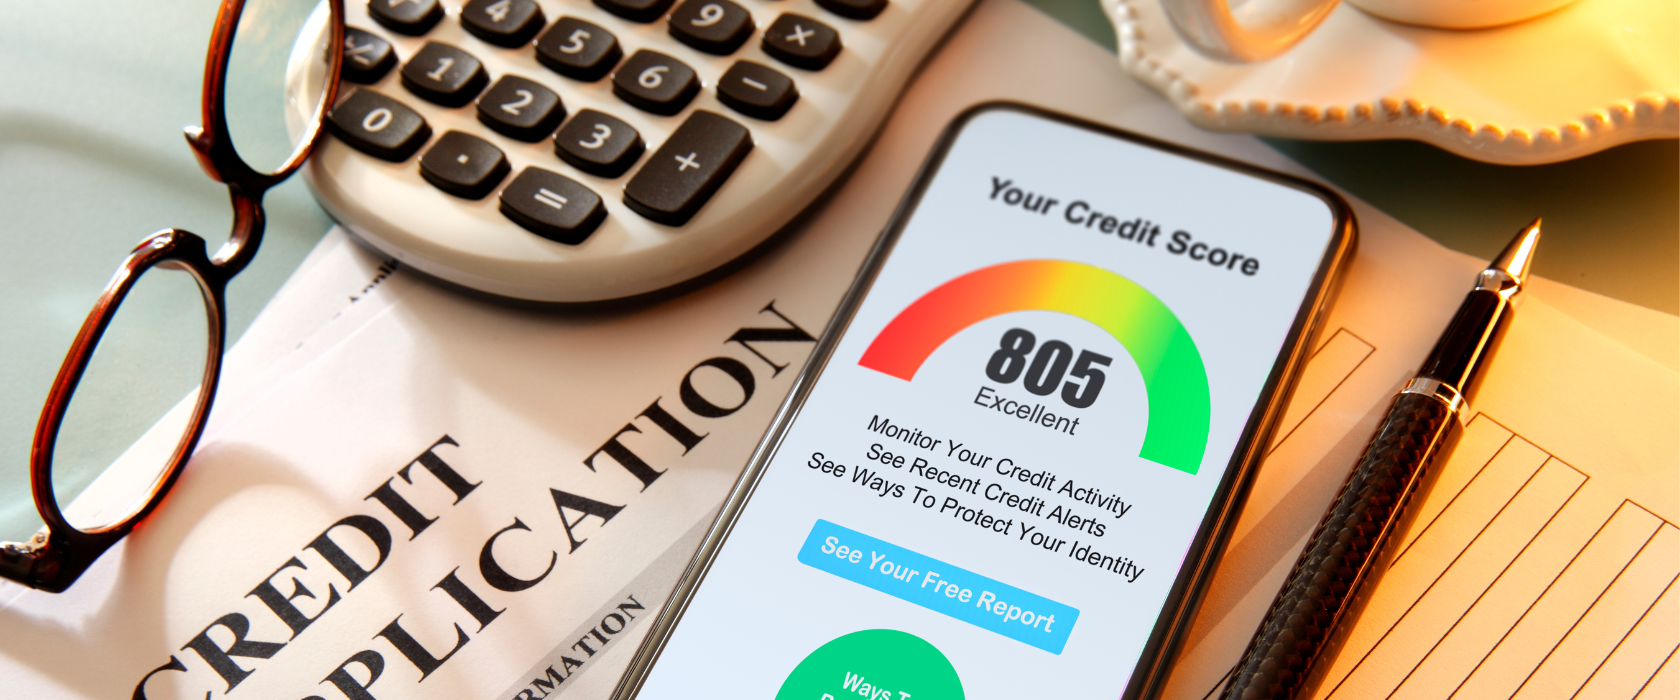 A cellphone depicts a credit score chart that displays a score of 